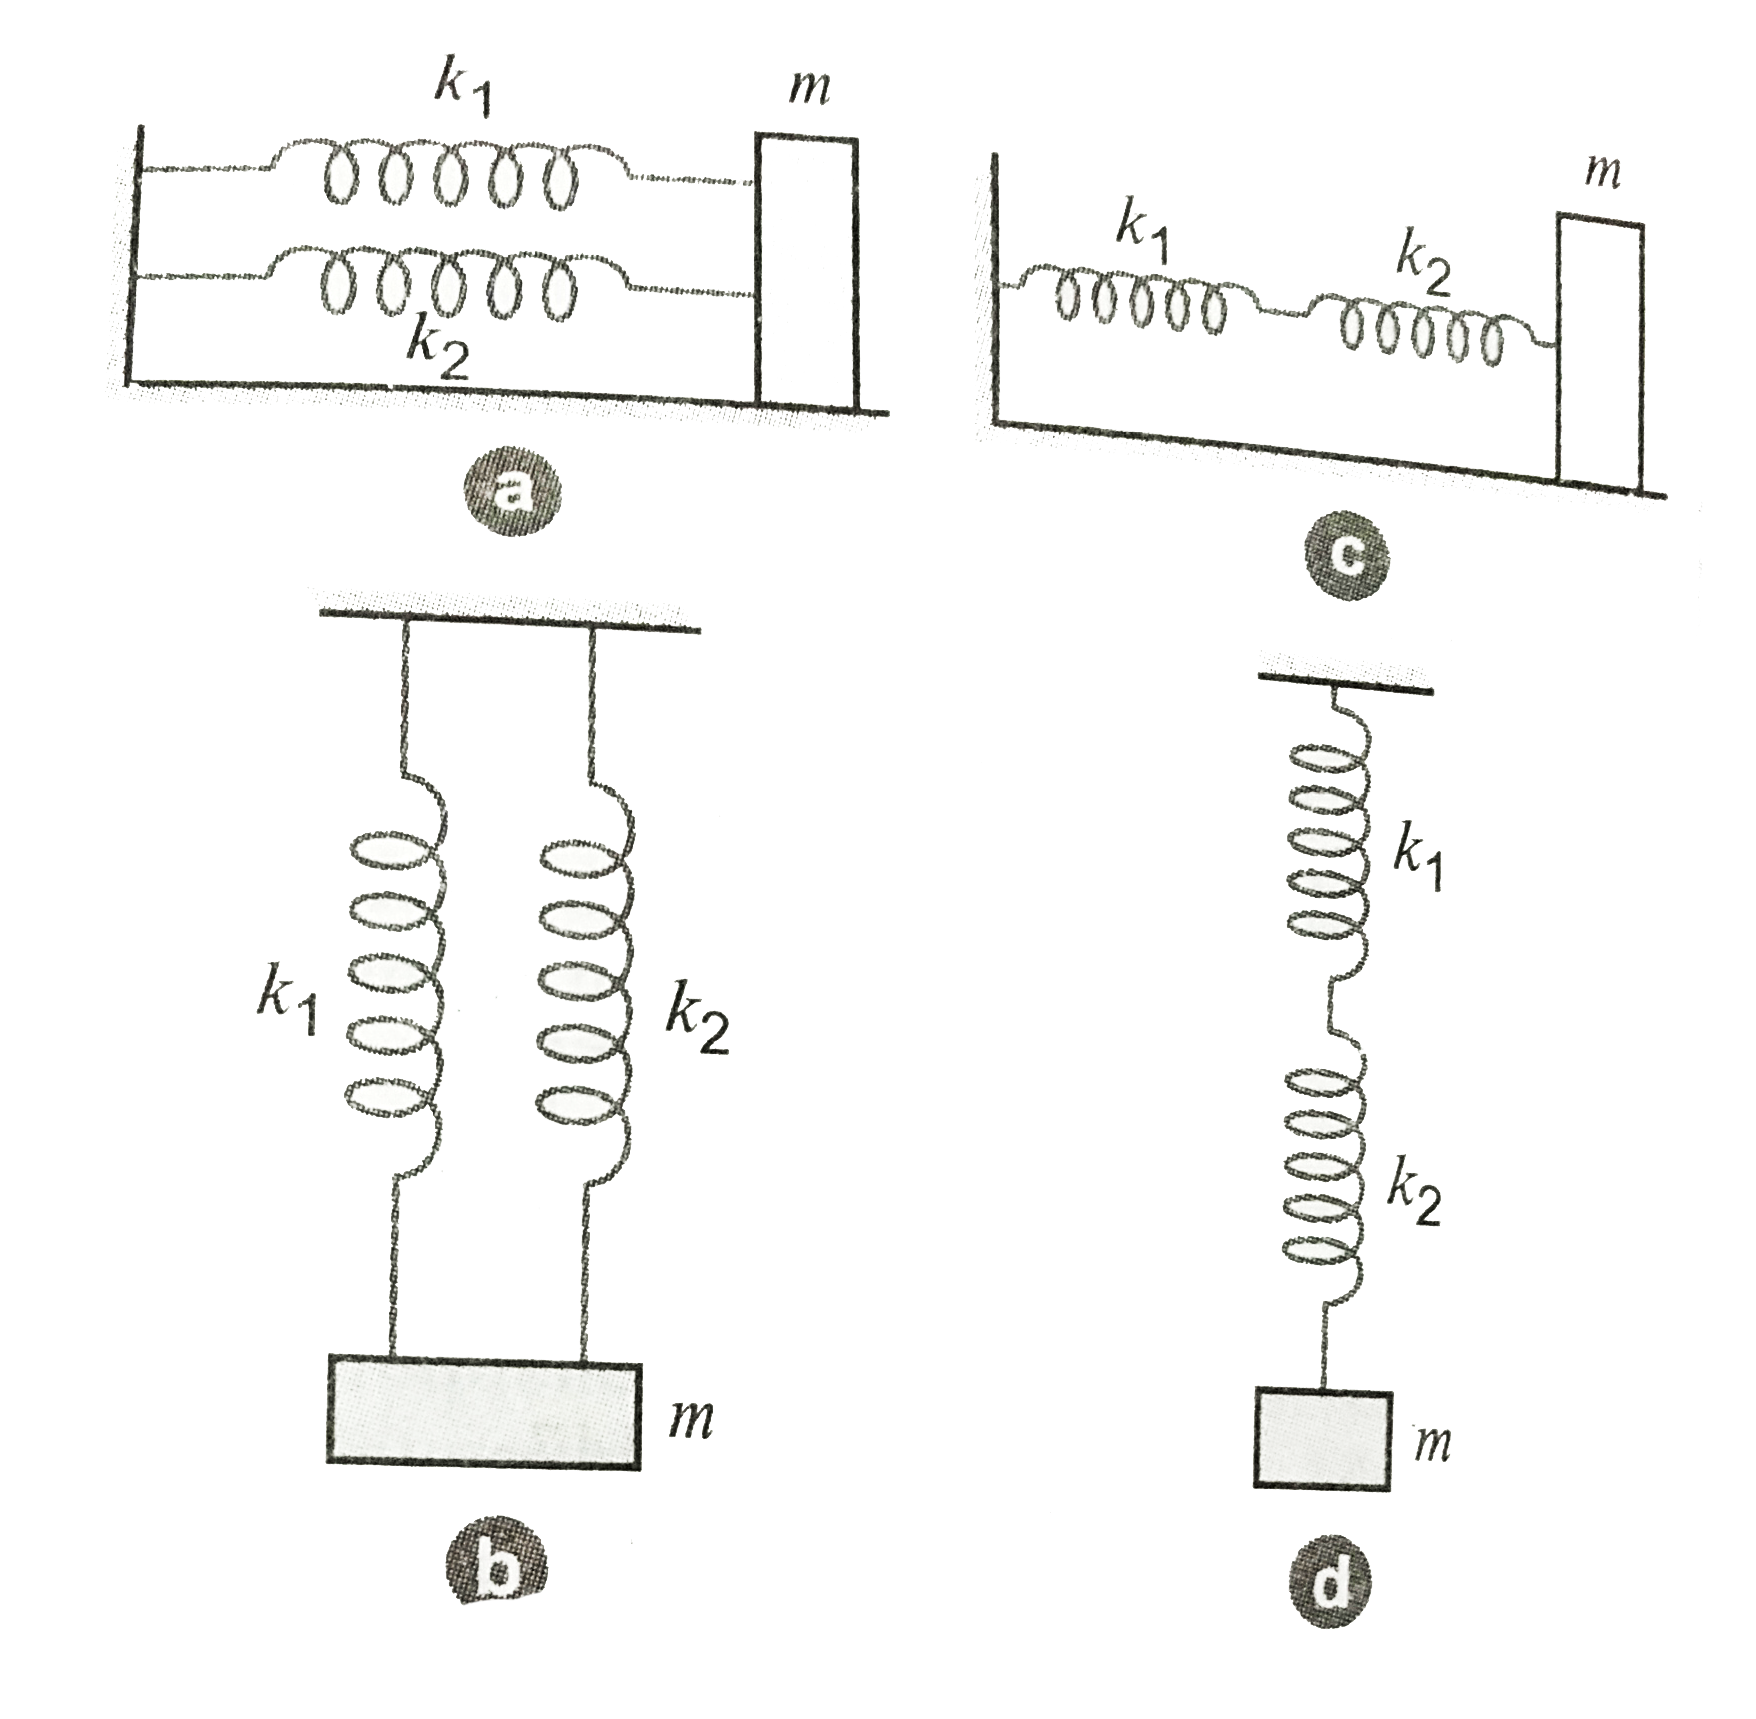 four different springs arrangements. If the mass m in each arrangement is displaced from its equilibrium position and released, what is the resulting frequency of vibration ini each case? Neglect the mass of the spring. Figure (a) and (b) represent an arrangement of springs in parallel and (c) and (d) represent springs in series?